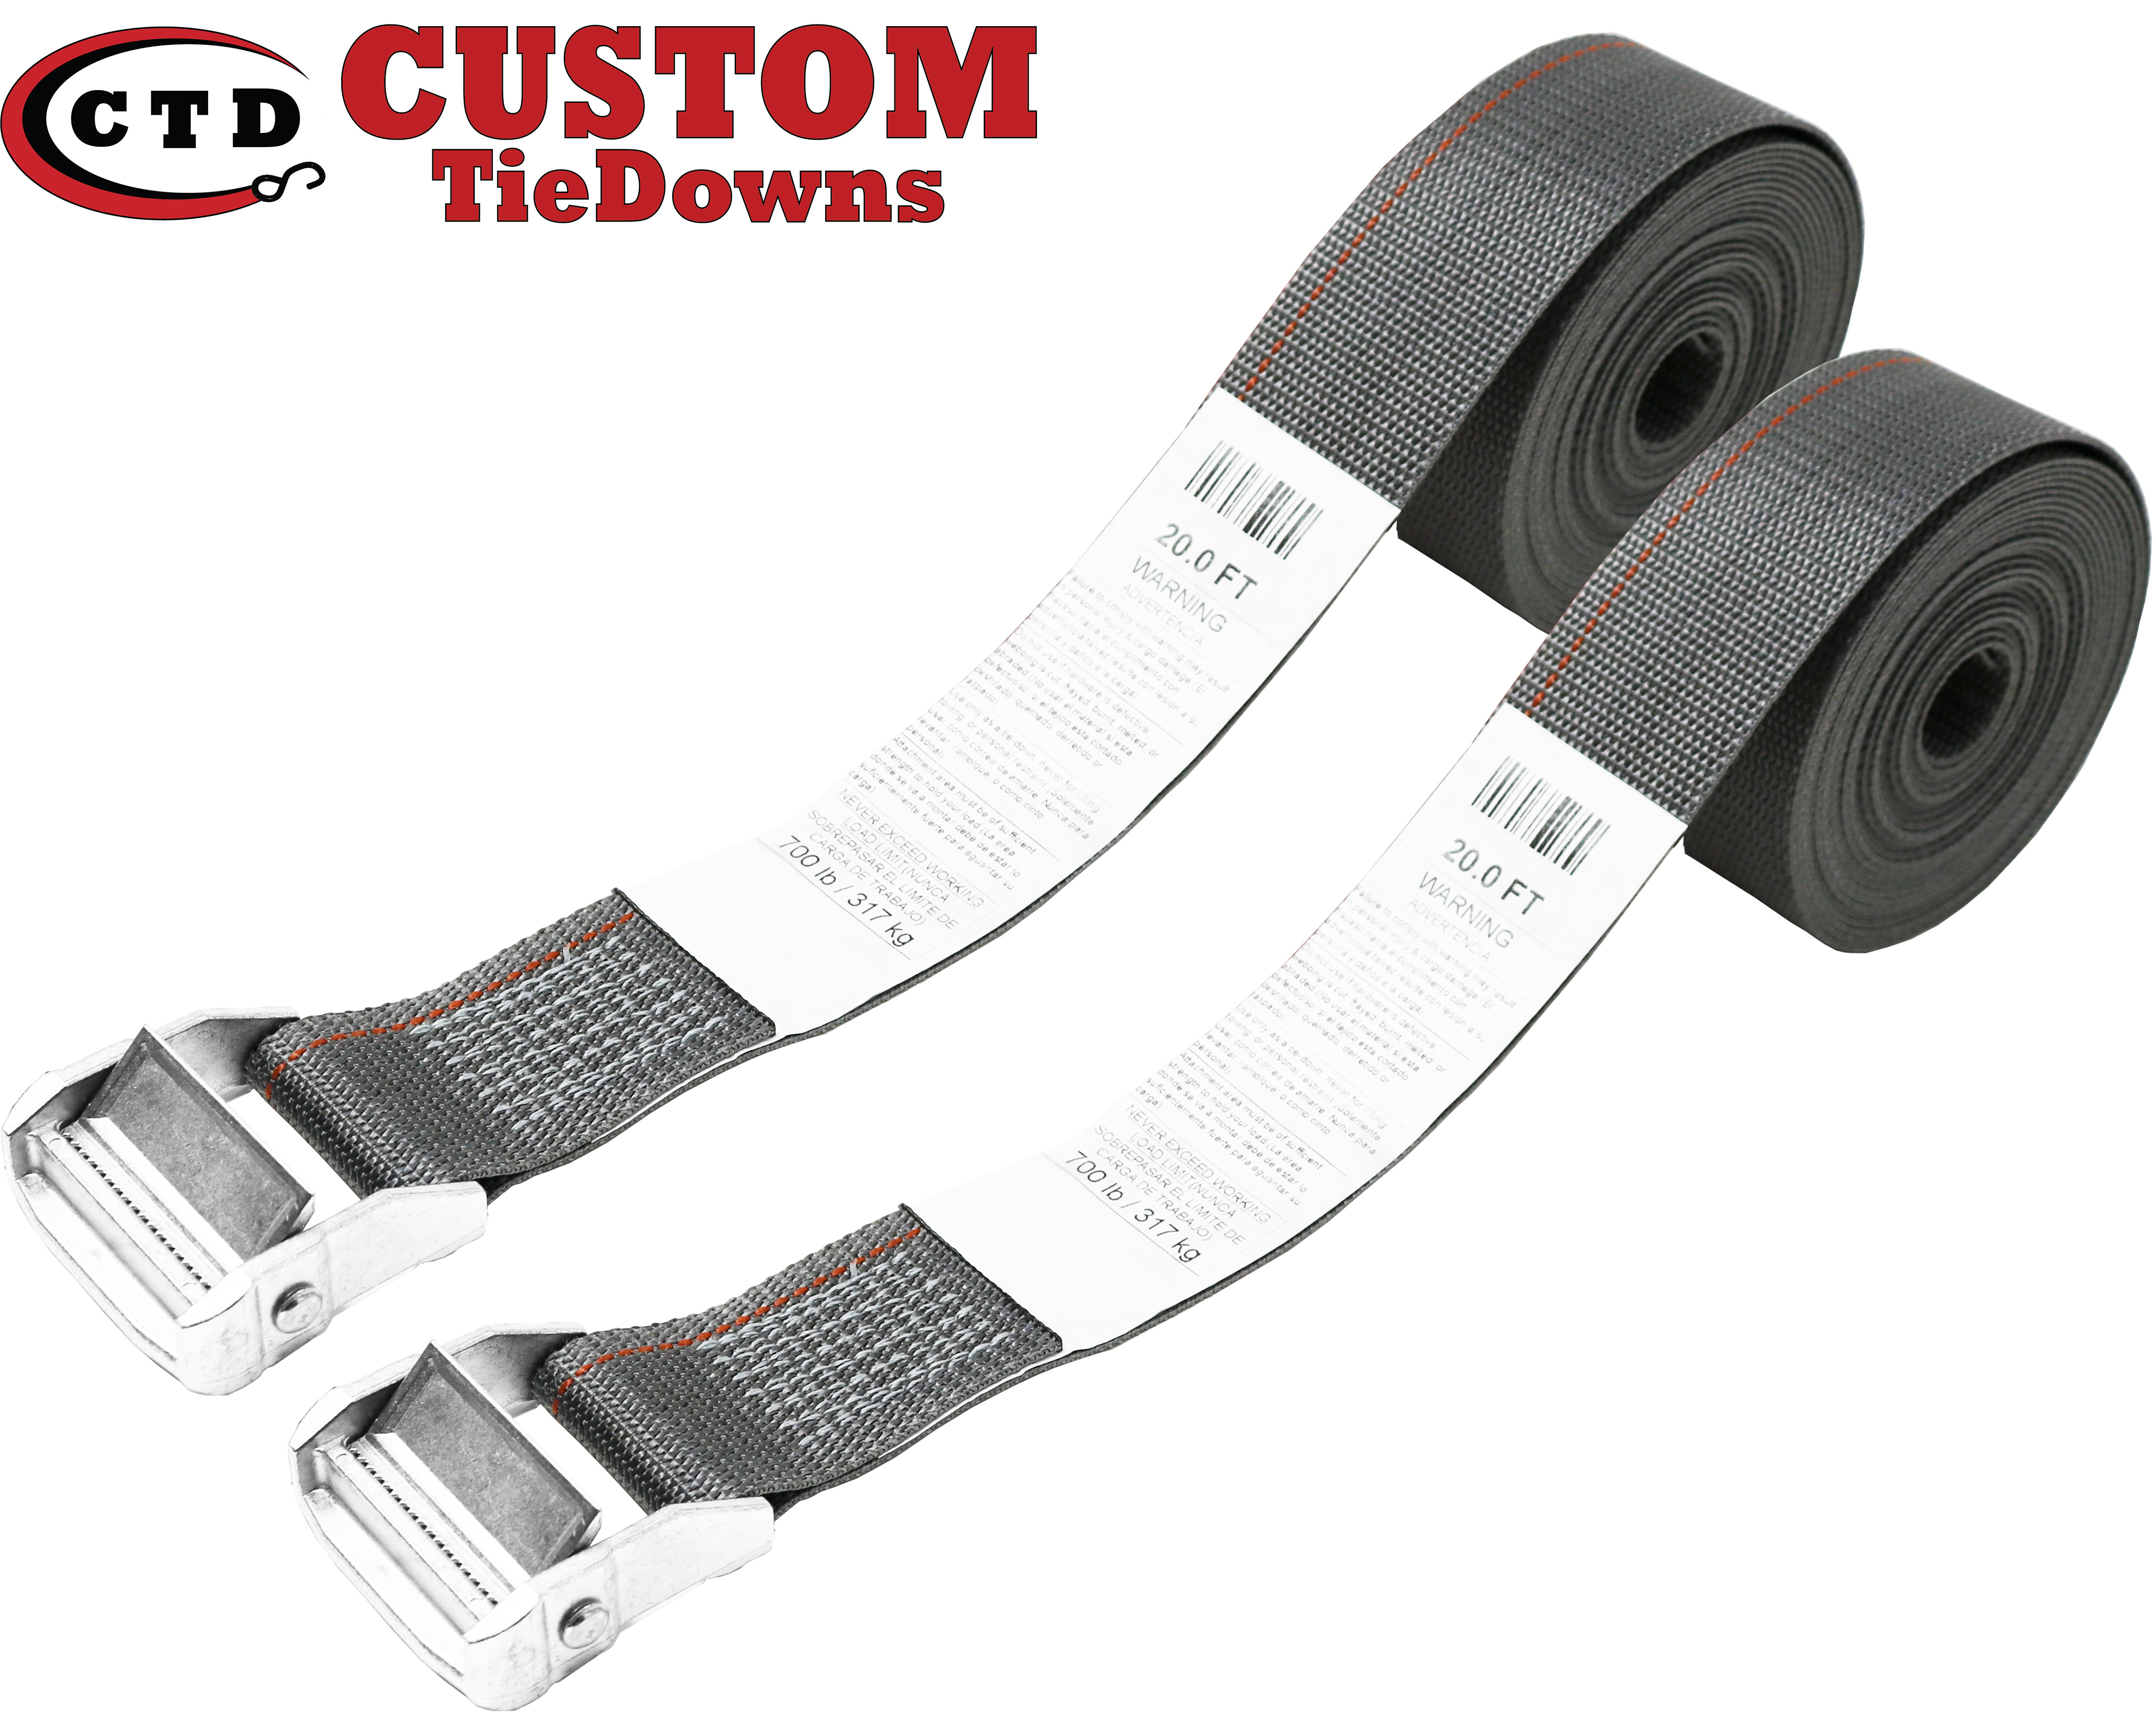 CustomTieDowns 2 Pack-2 inch x 20 Foot Cam Buckle Cinch Strap. Endless Loop ( No Hooks) 8559 - image 5 of 5